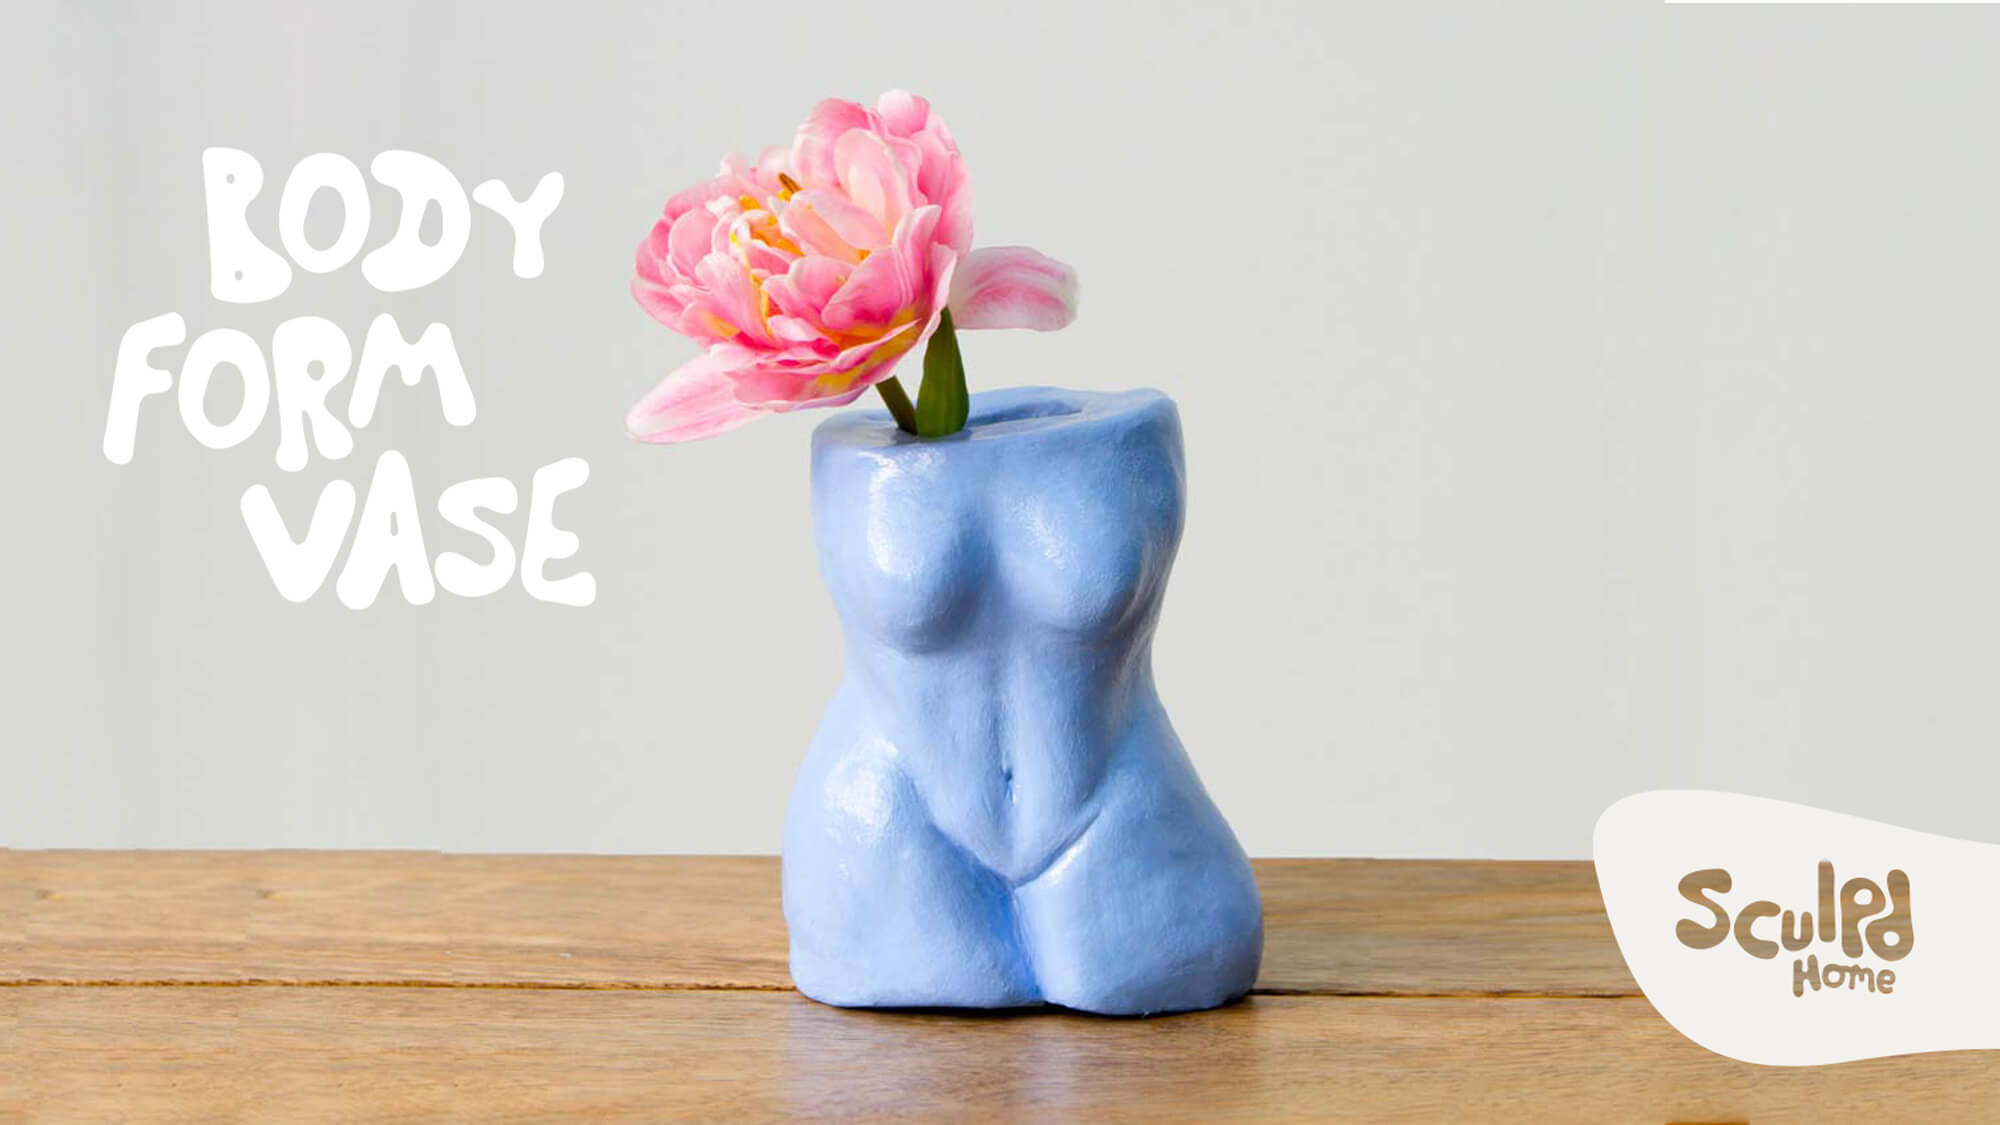 Make Your Own Body Form Vases | By Sculpd Home